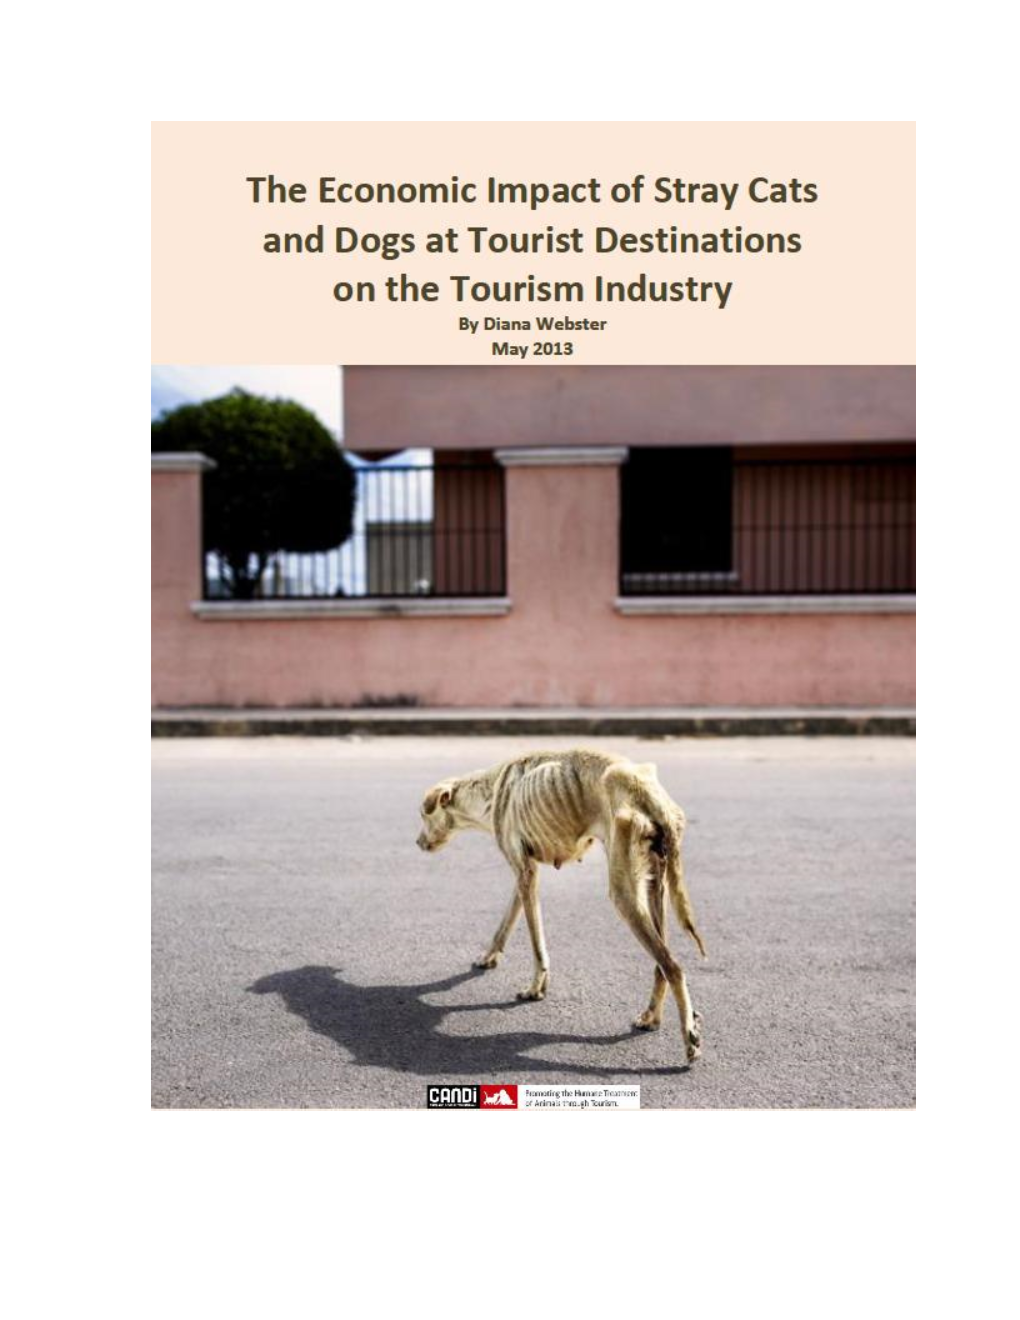 The Economic Impact of Stray Cats and Dogs at Tourist Destinations on the Tourism Industry